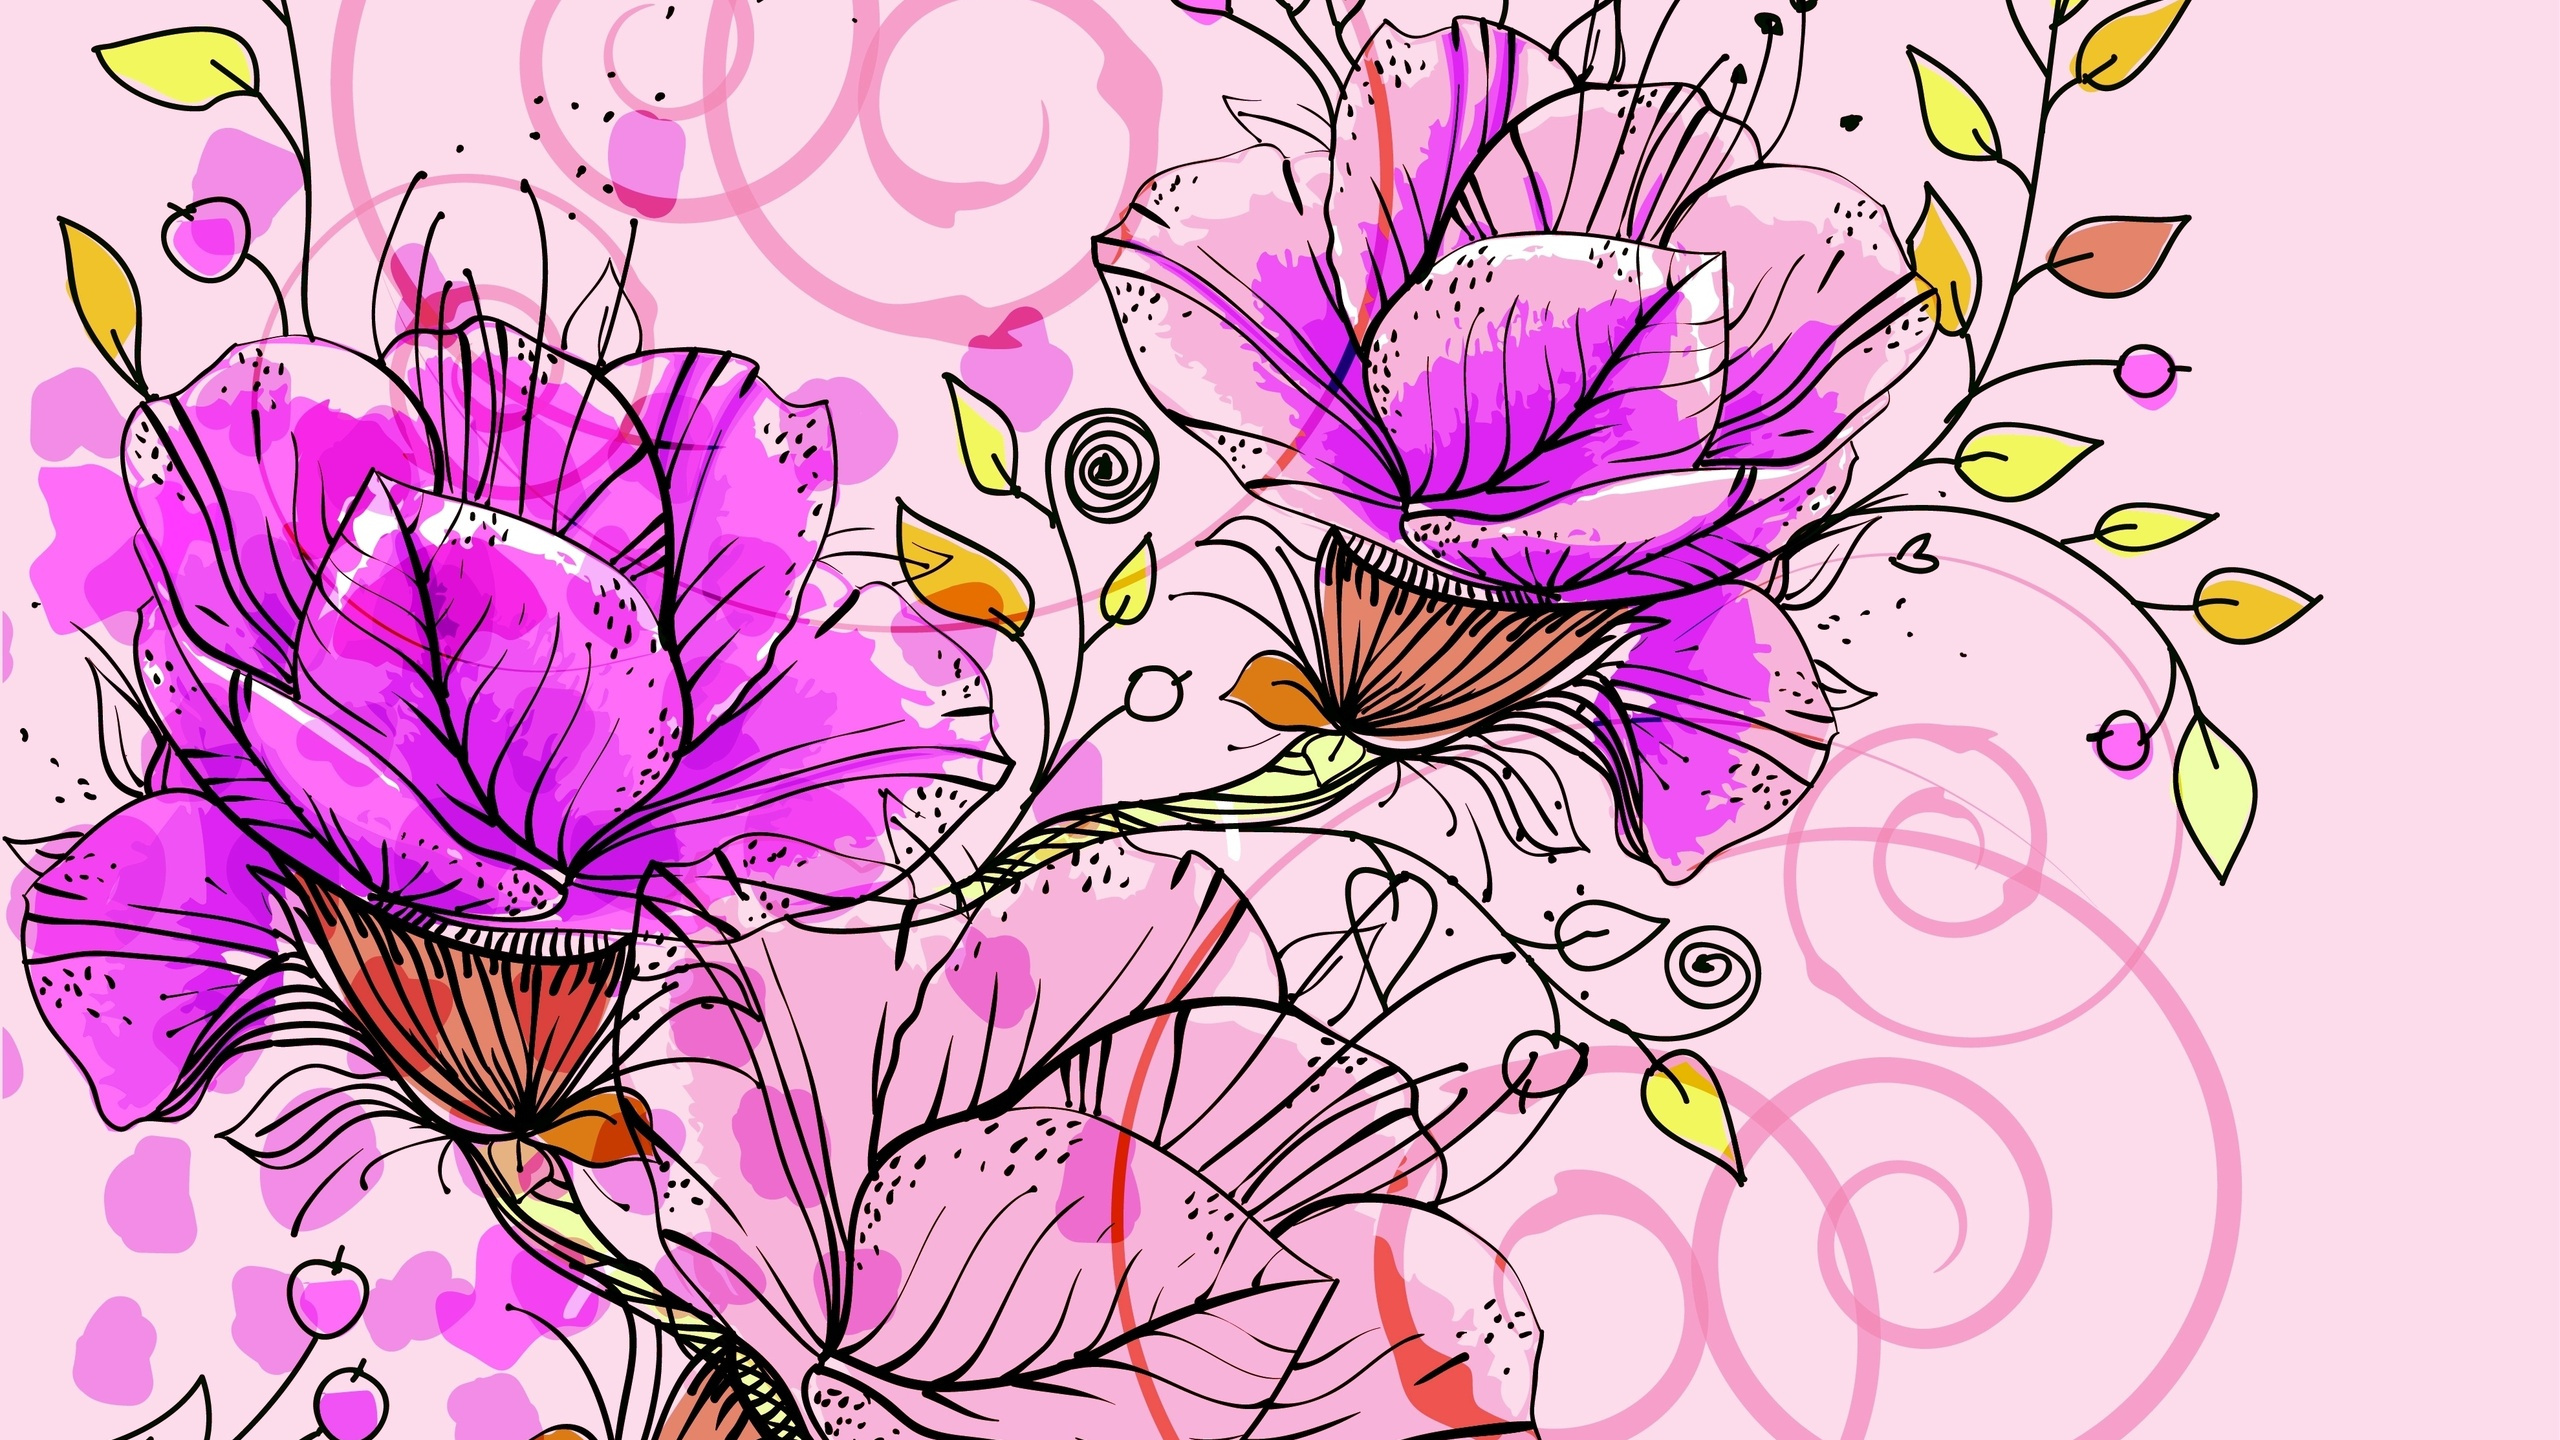 Purple and White Flower Illustration. Wallpaper in 2560x1440 Resolution